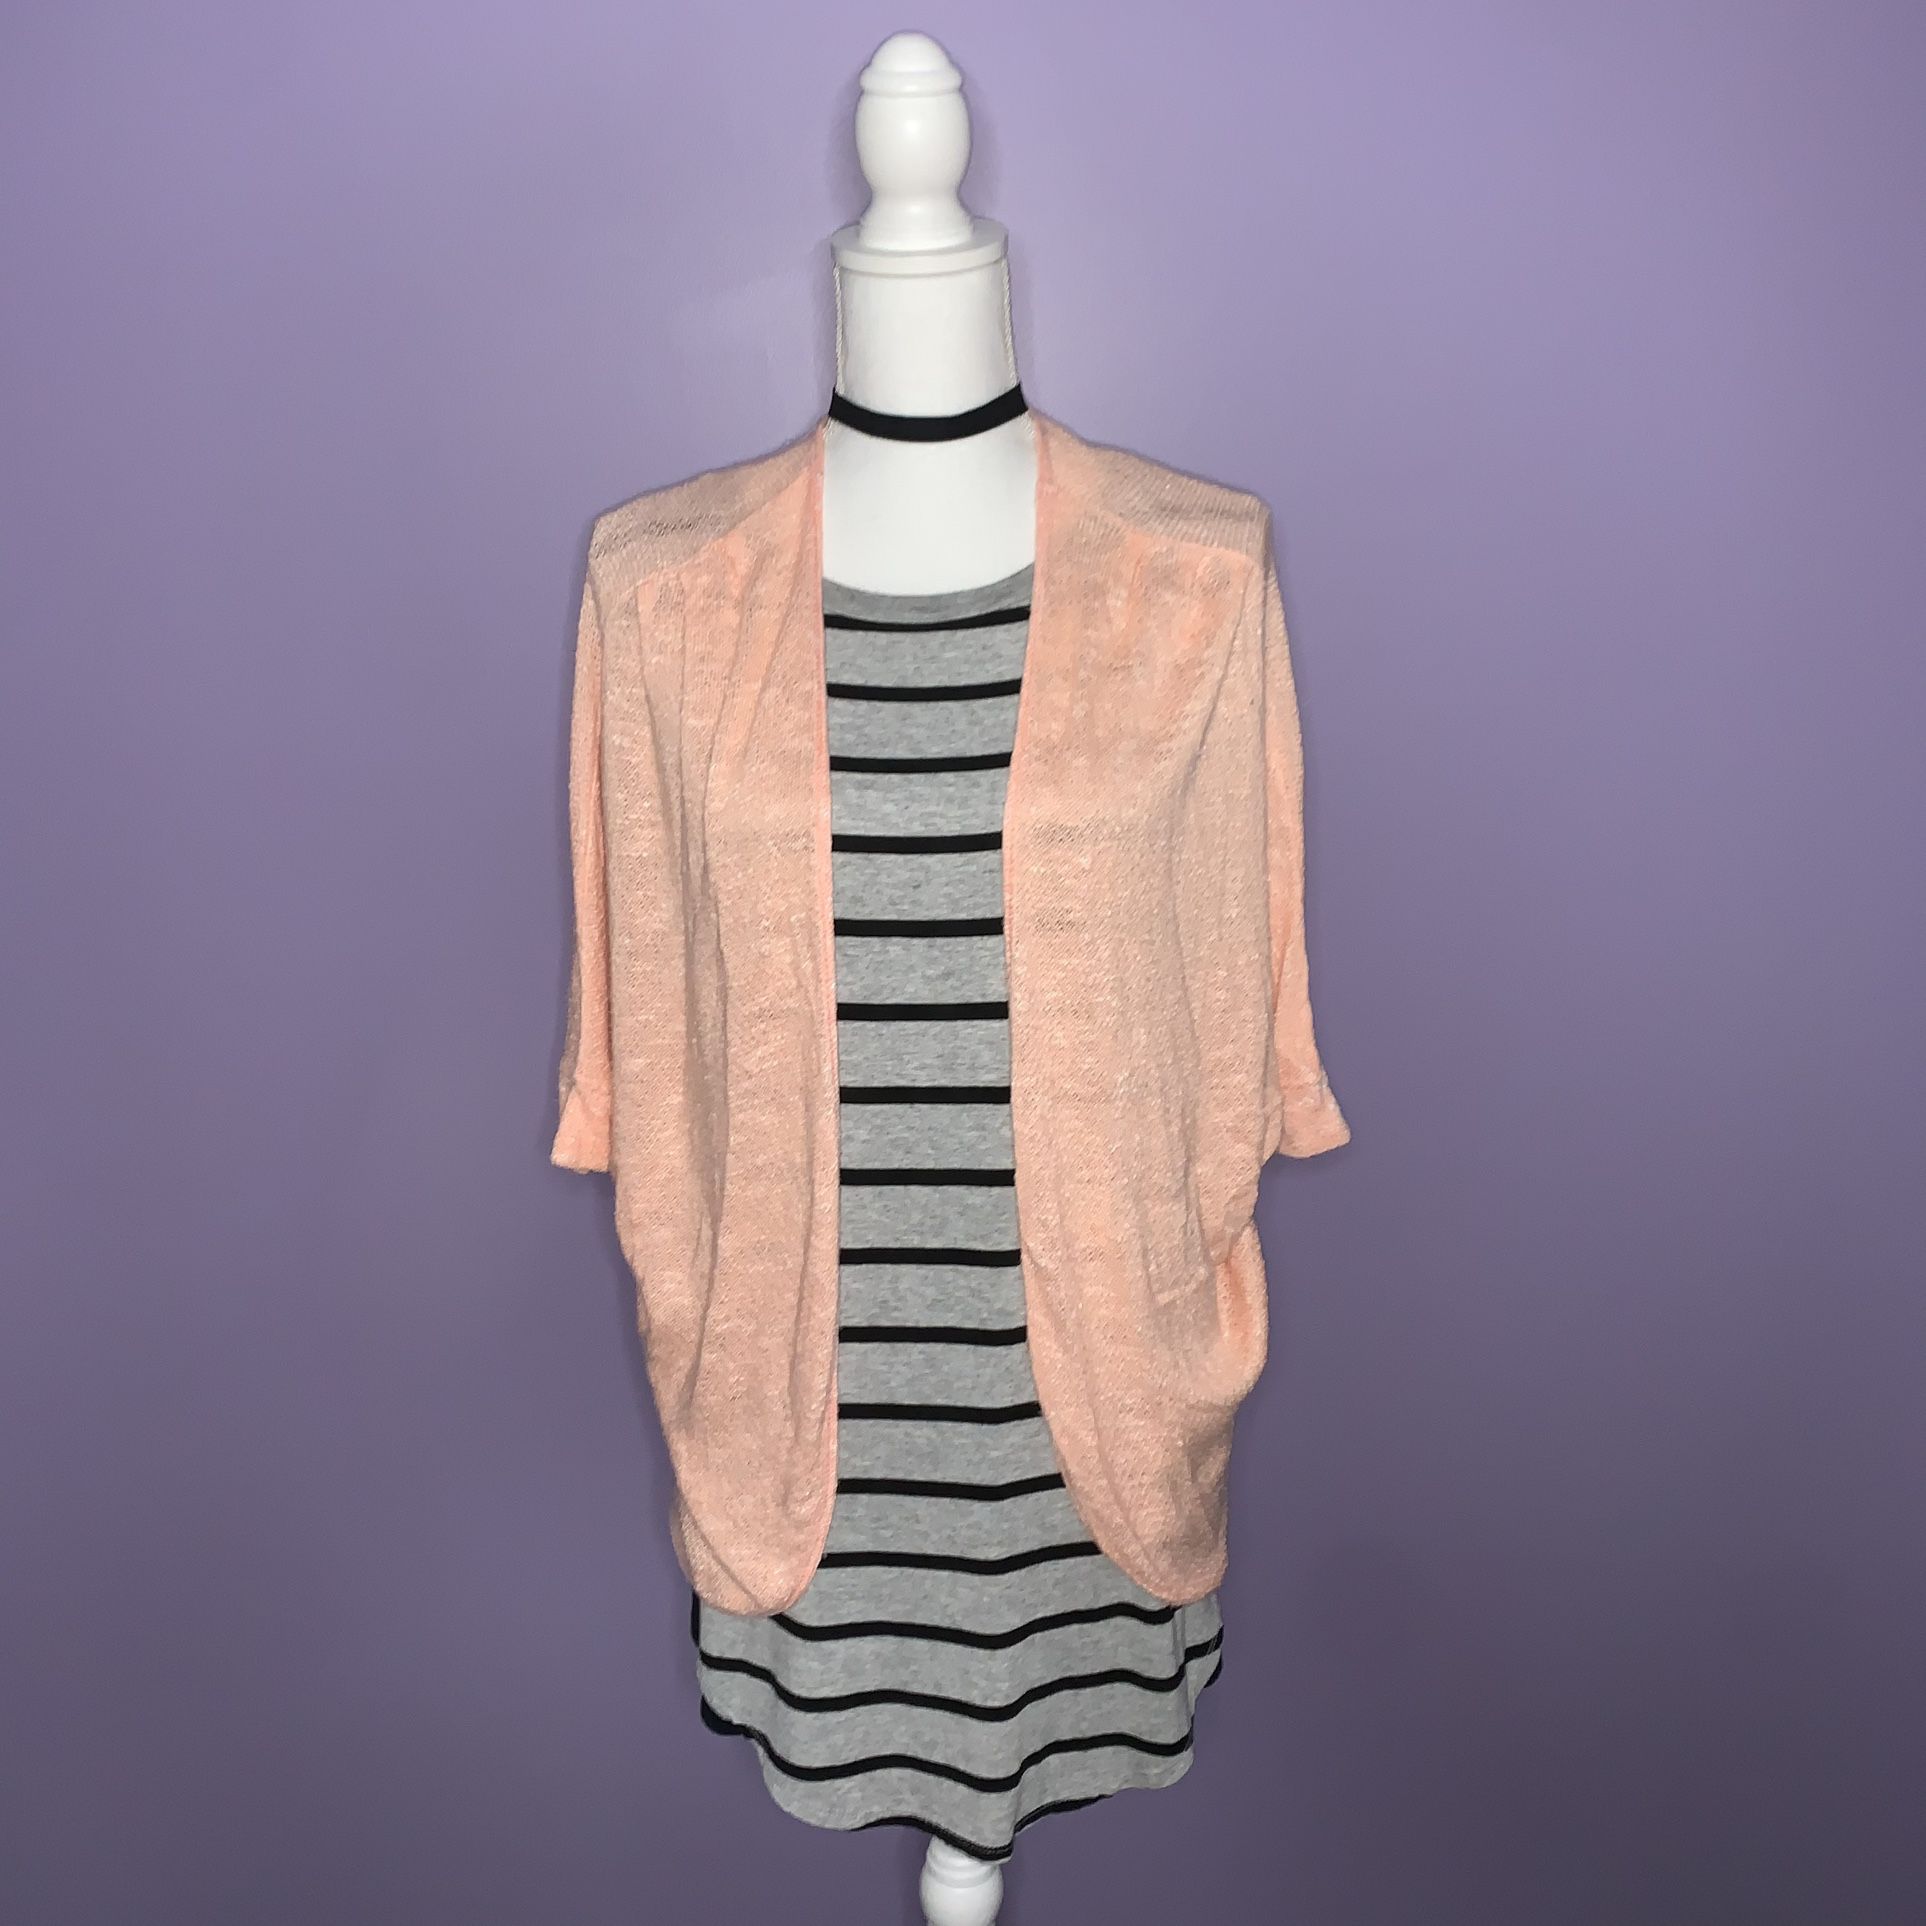 Say What? Coral Cocoon Cardigan